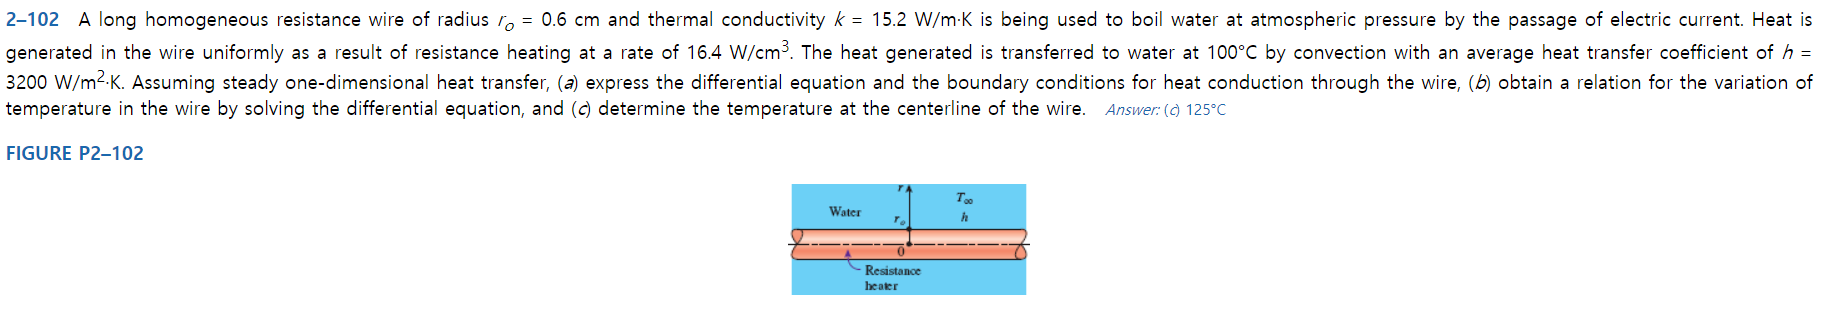 2-102 A long homogeneous resistance wire of radius r = 0.6 cm and thermal conductivity k 15.2 W/m-K is being used to boil water at atmospheric pressure by the passage of electric current. Heat is
generated in the wire uniformly as a result of resistance heating at a rate of 16.4 W/cm3. The heat generated is transferred to water at 100°C by convection with an average heat transfer coefficient of h
3200 W/m2-K. Assuming steady one-dimensional heat transfer, (a) express the differential equation and the boundary conditions for heat conduction through the wire, (b) obtain a relation for the variation of
temperature in the wire by solving the differential equation, and (c) determine the temperature at the centerline of the wire. Answer: () 125°C
FIGURE P2-102
т.
Water
Resistance
heater
